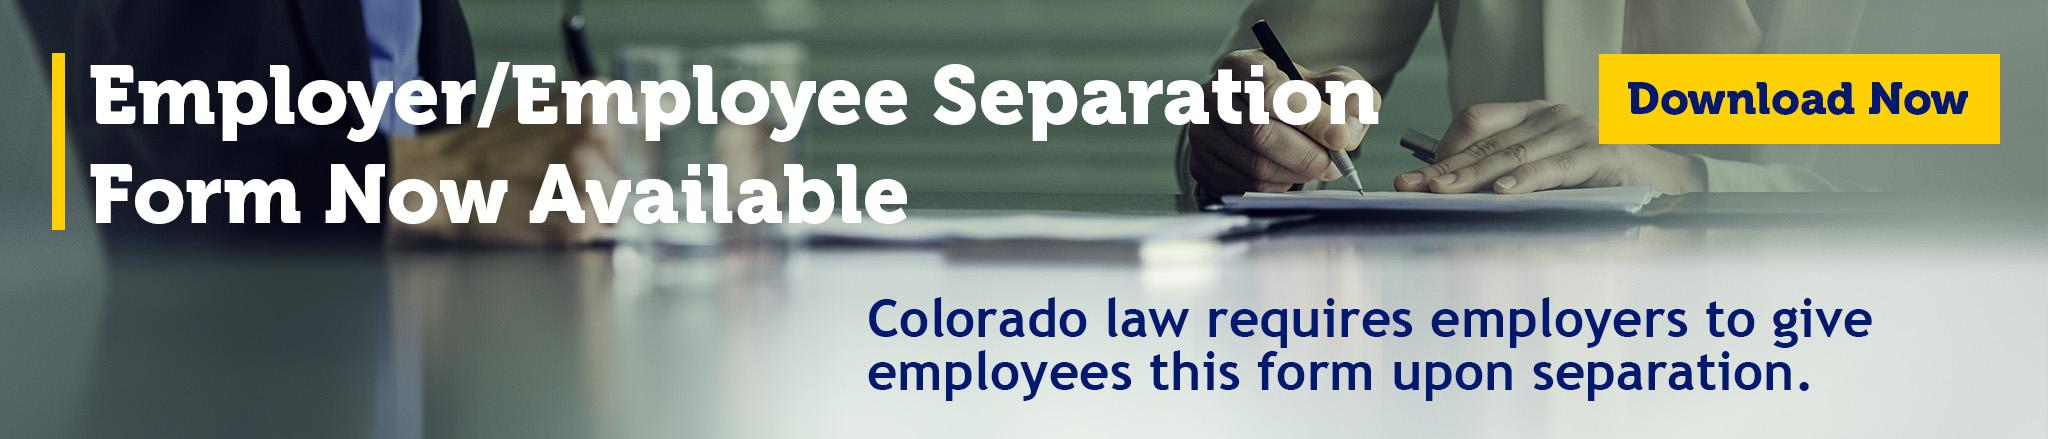 Employer-Employee Separation Form Now Available